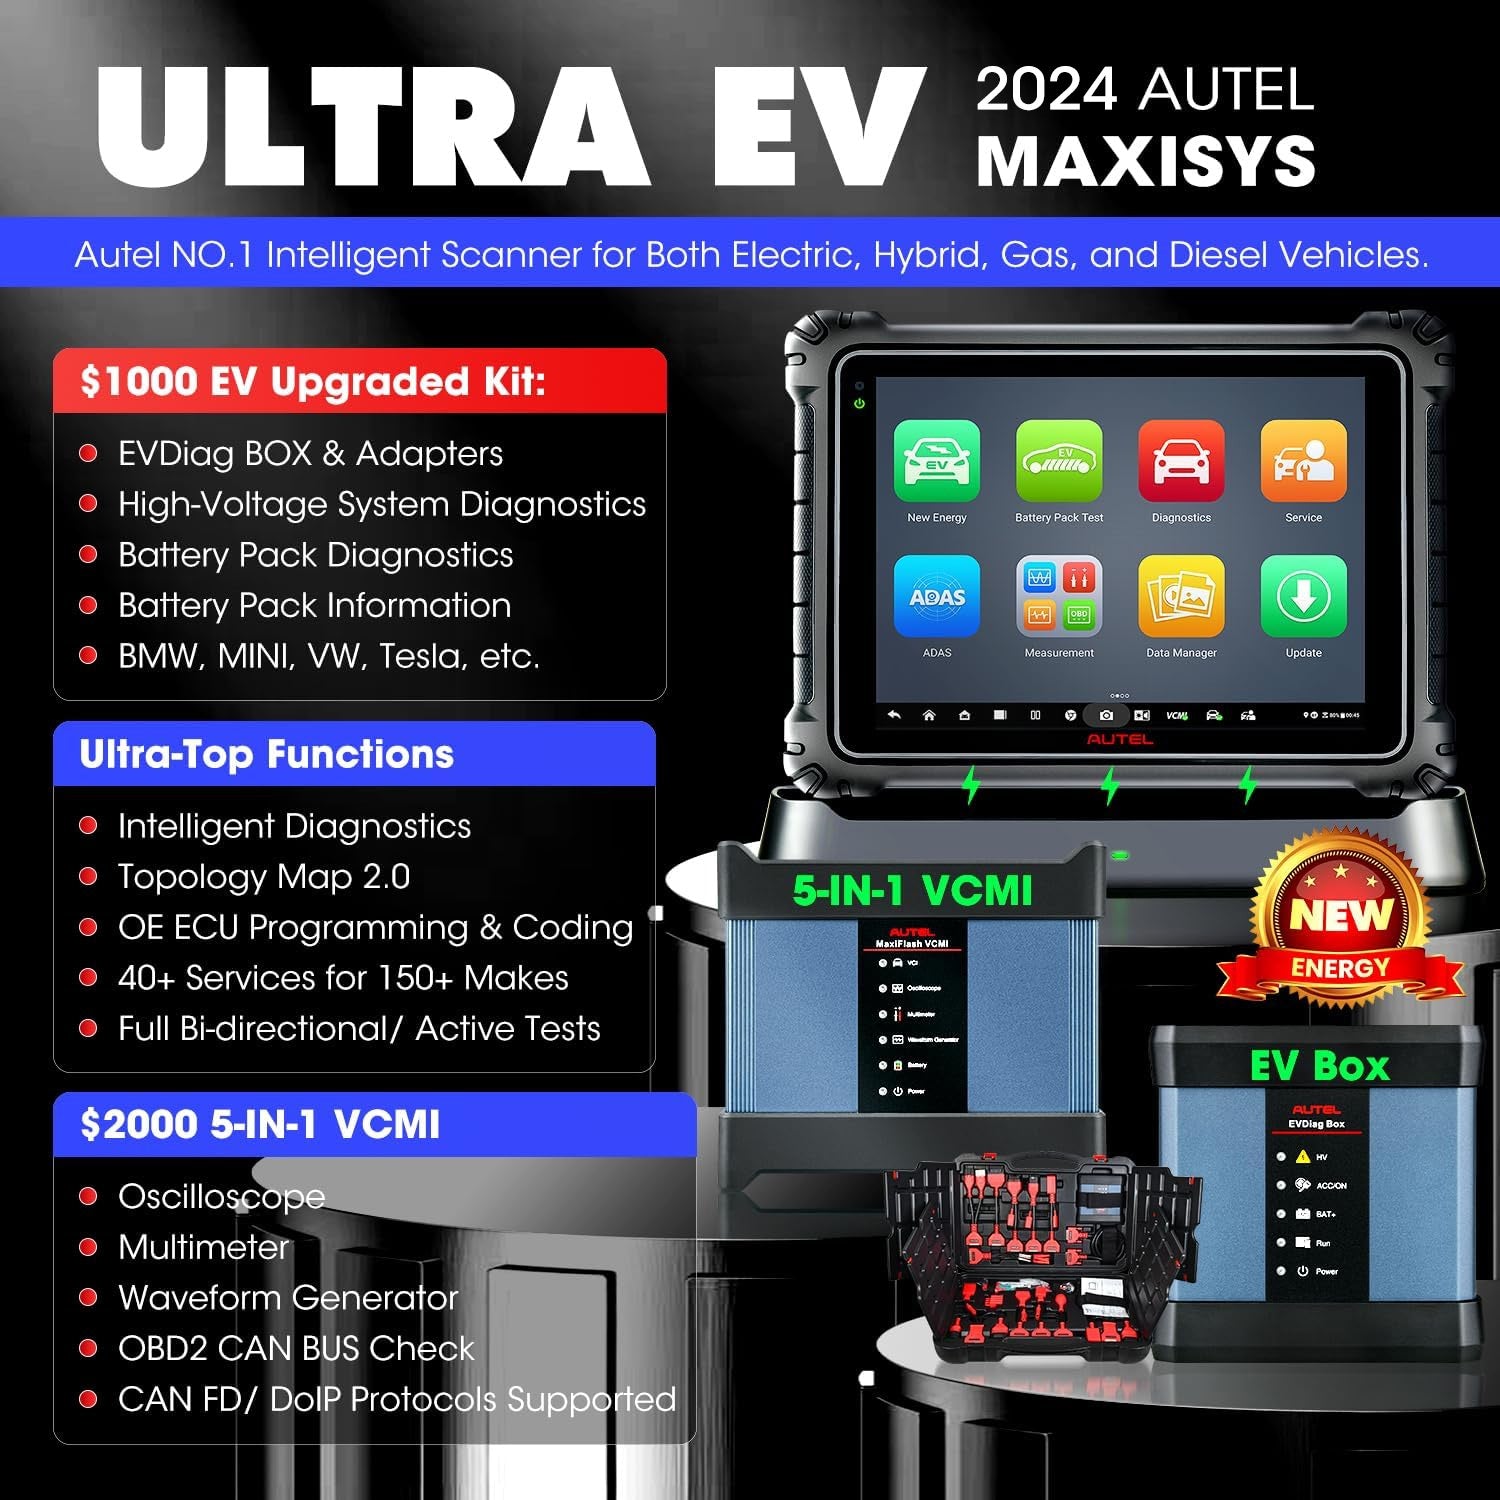 ultra ev features